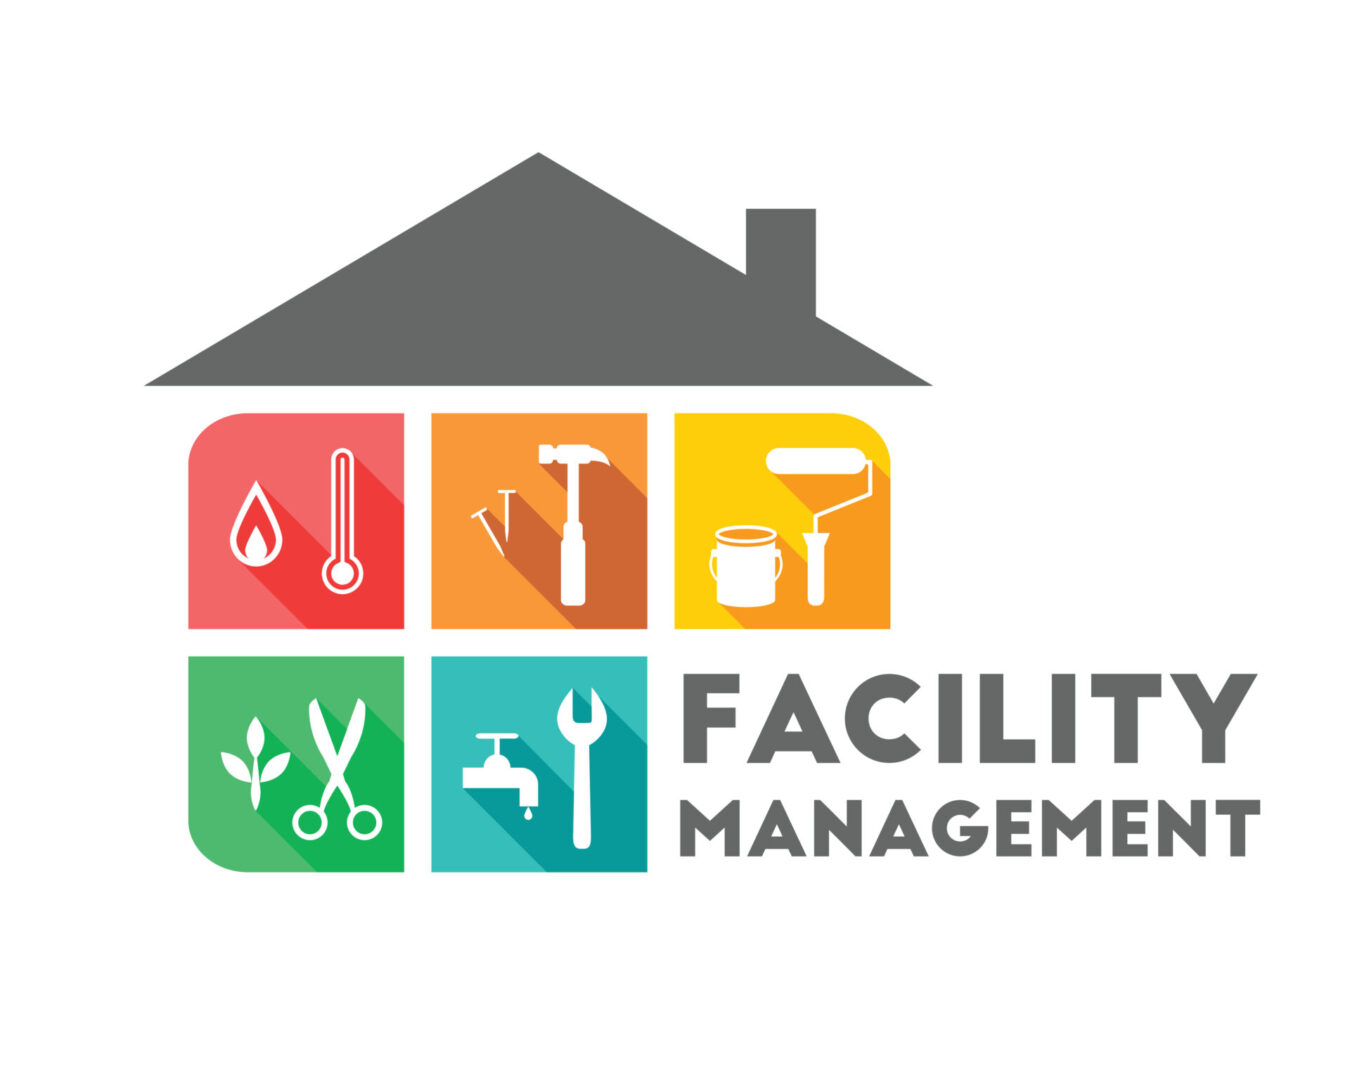 Facility management concept with building and working tools in flat design